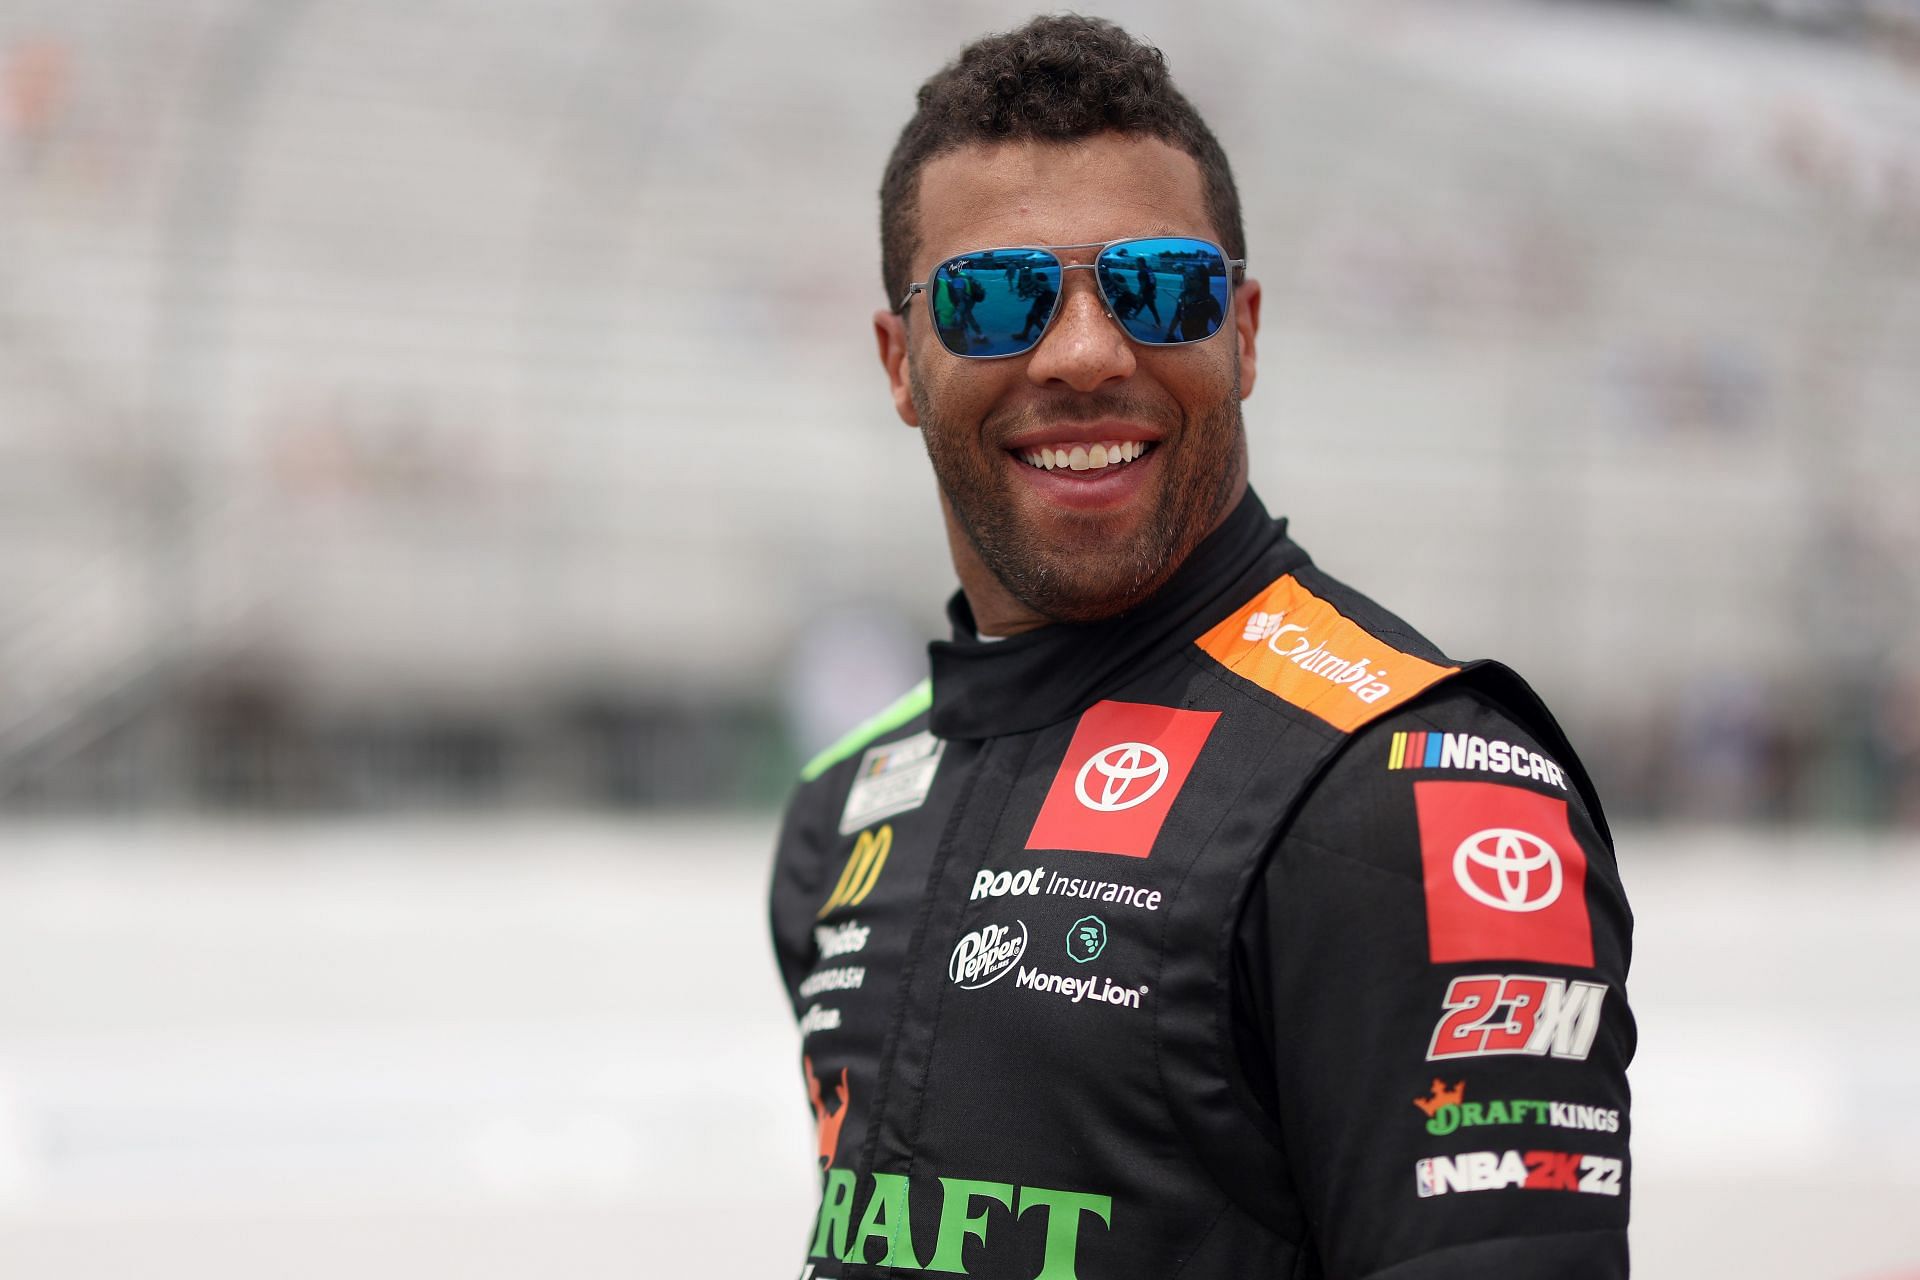 Bubba Wallace walks the grid during qualifying for the NASCAR Cup Series Ambetter 301 at New Hampshire Motor Speedway